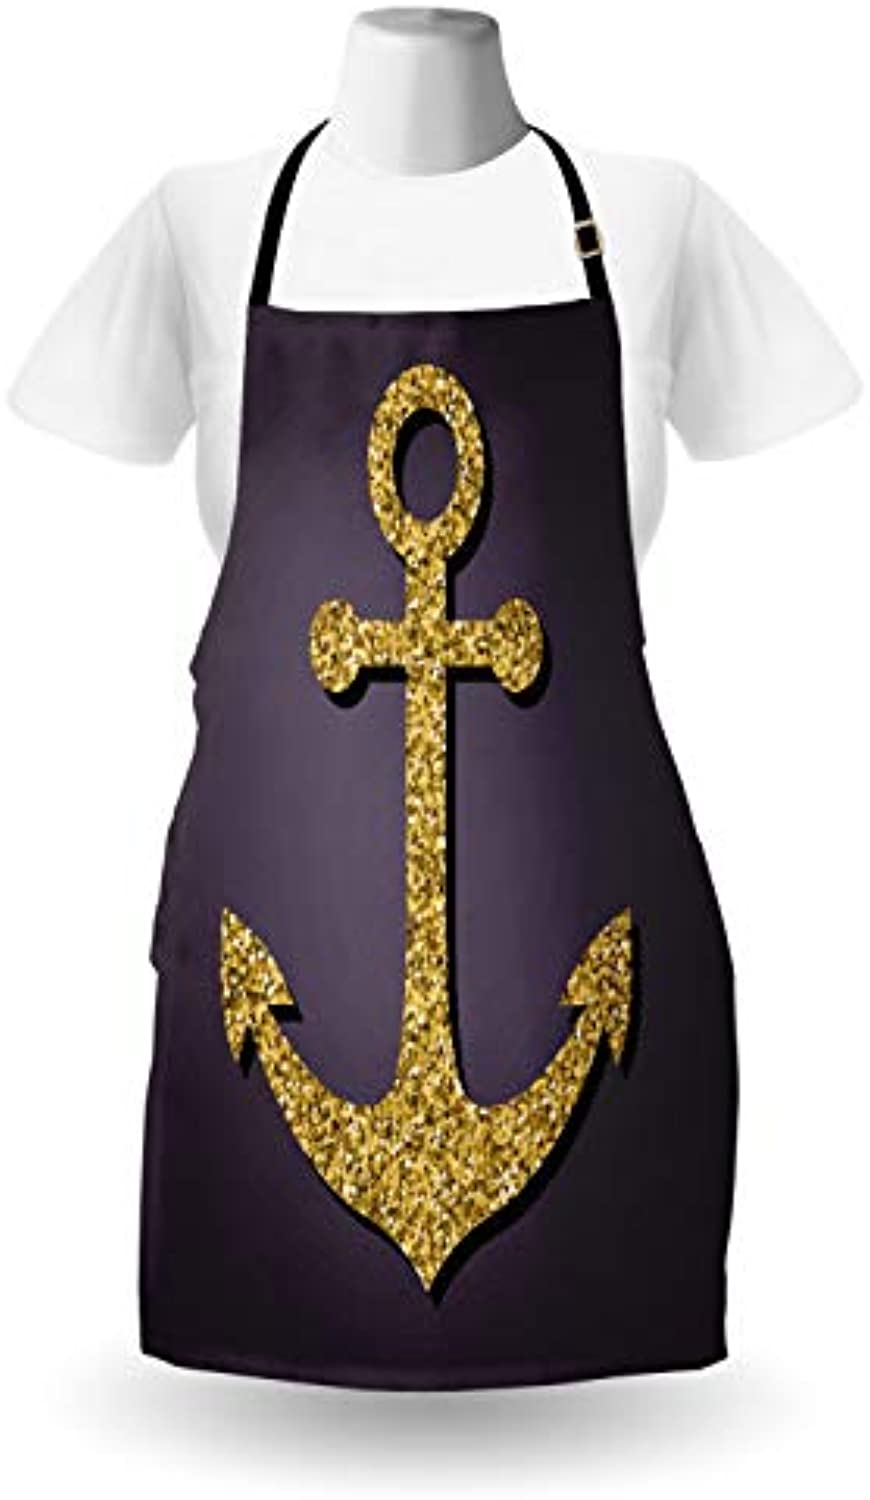 Granbey Anchor Apron  Marine Pattern Tranquility Peacefulness Display Nautical Marine Print  Unisex Kitchen Bib with Adjustable Neck for Cooking Gardening  Adult Size  Plum Yellow